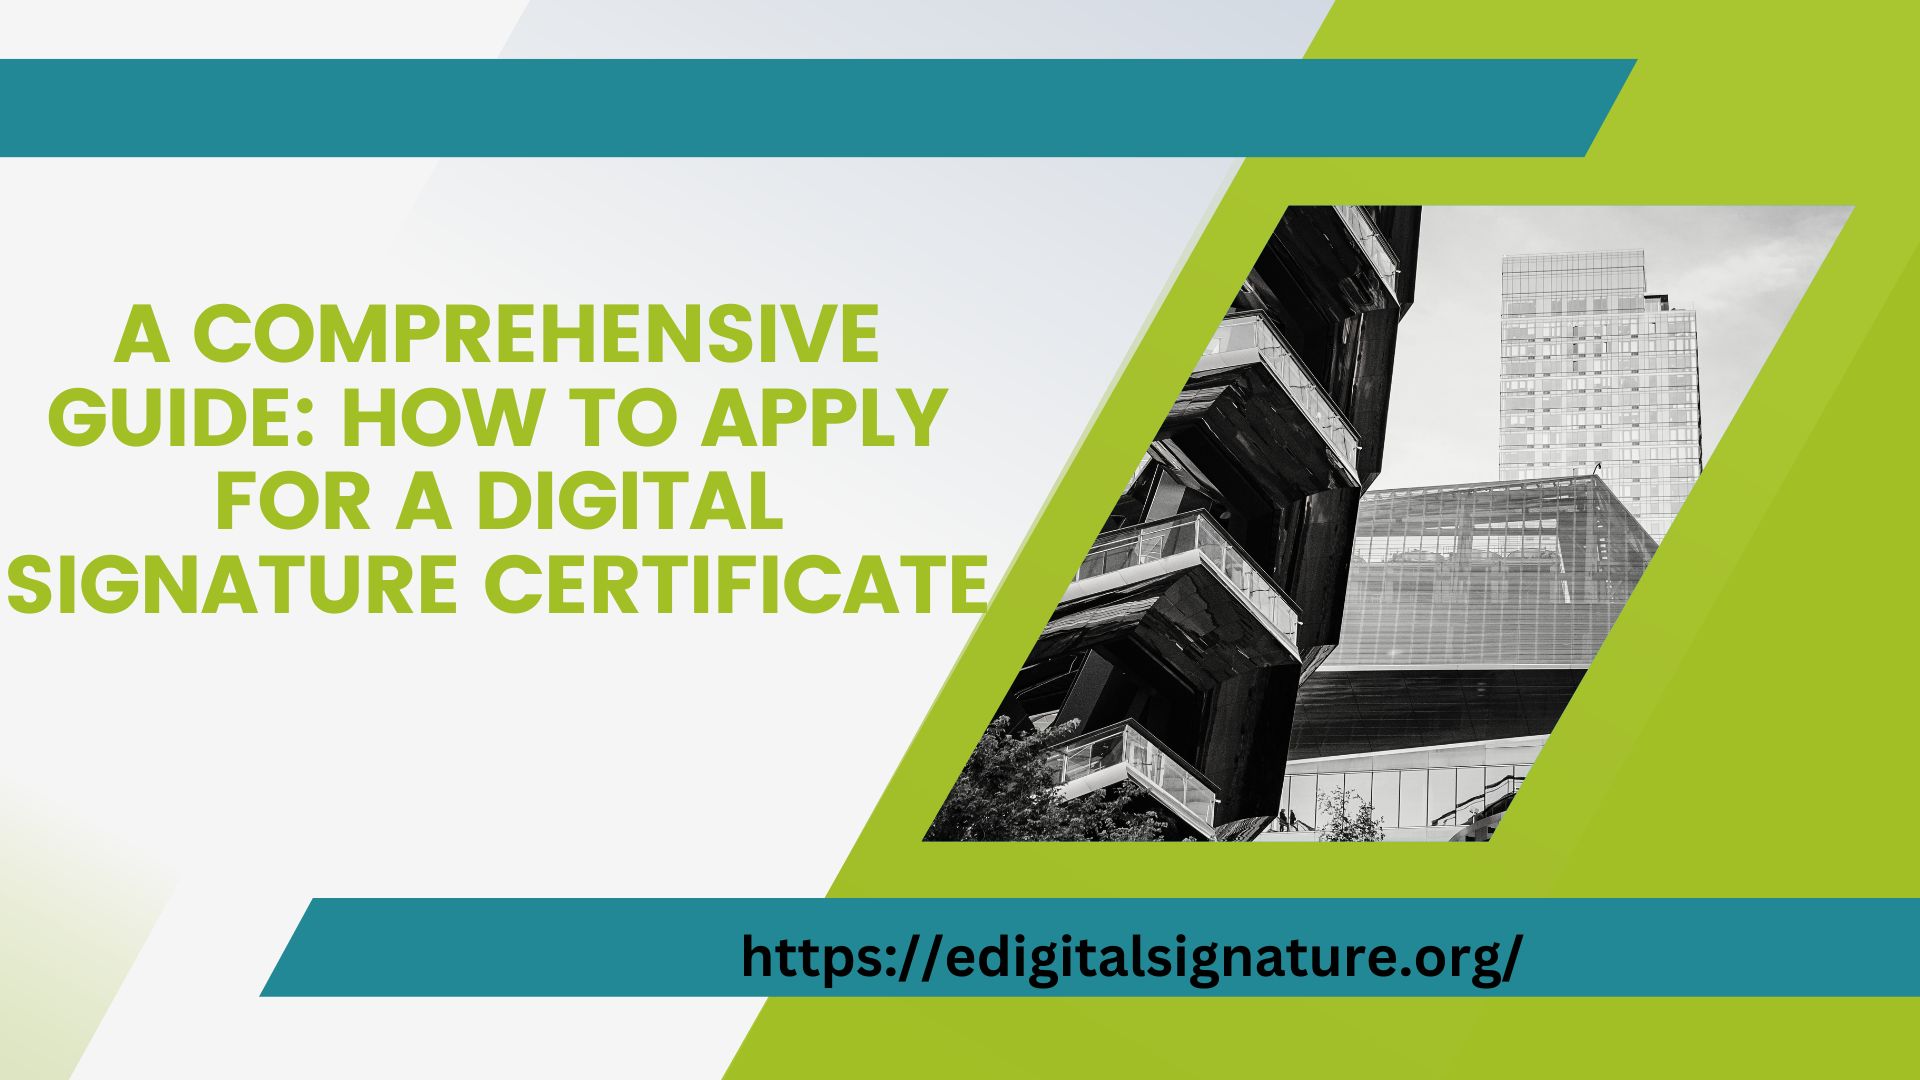 A Comprehensive Guide: How to Apply for a Digital Signature Certificate